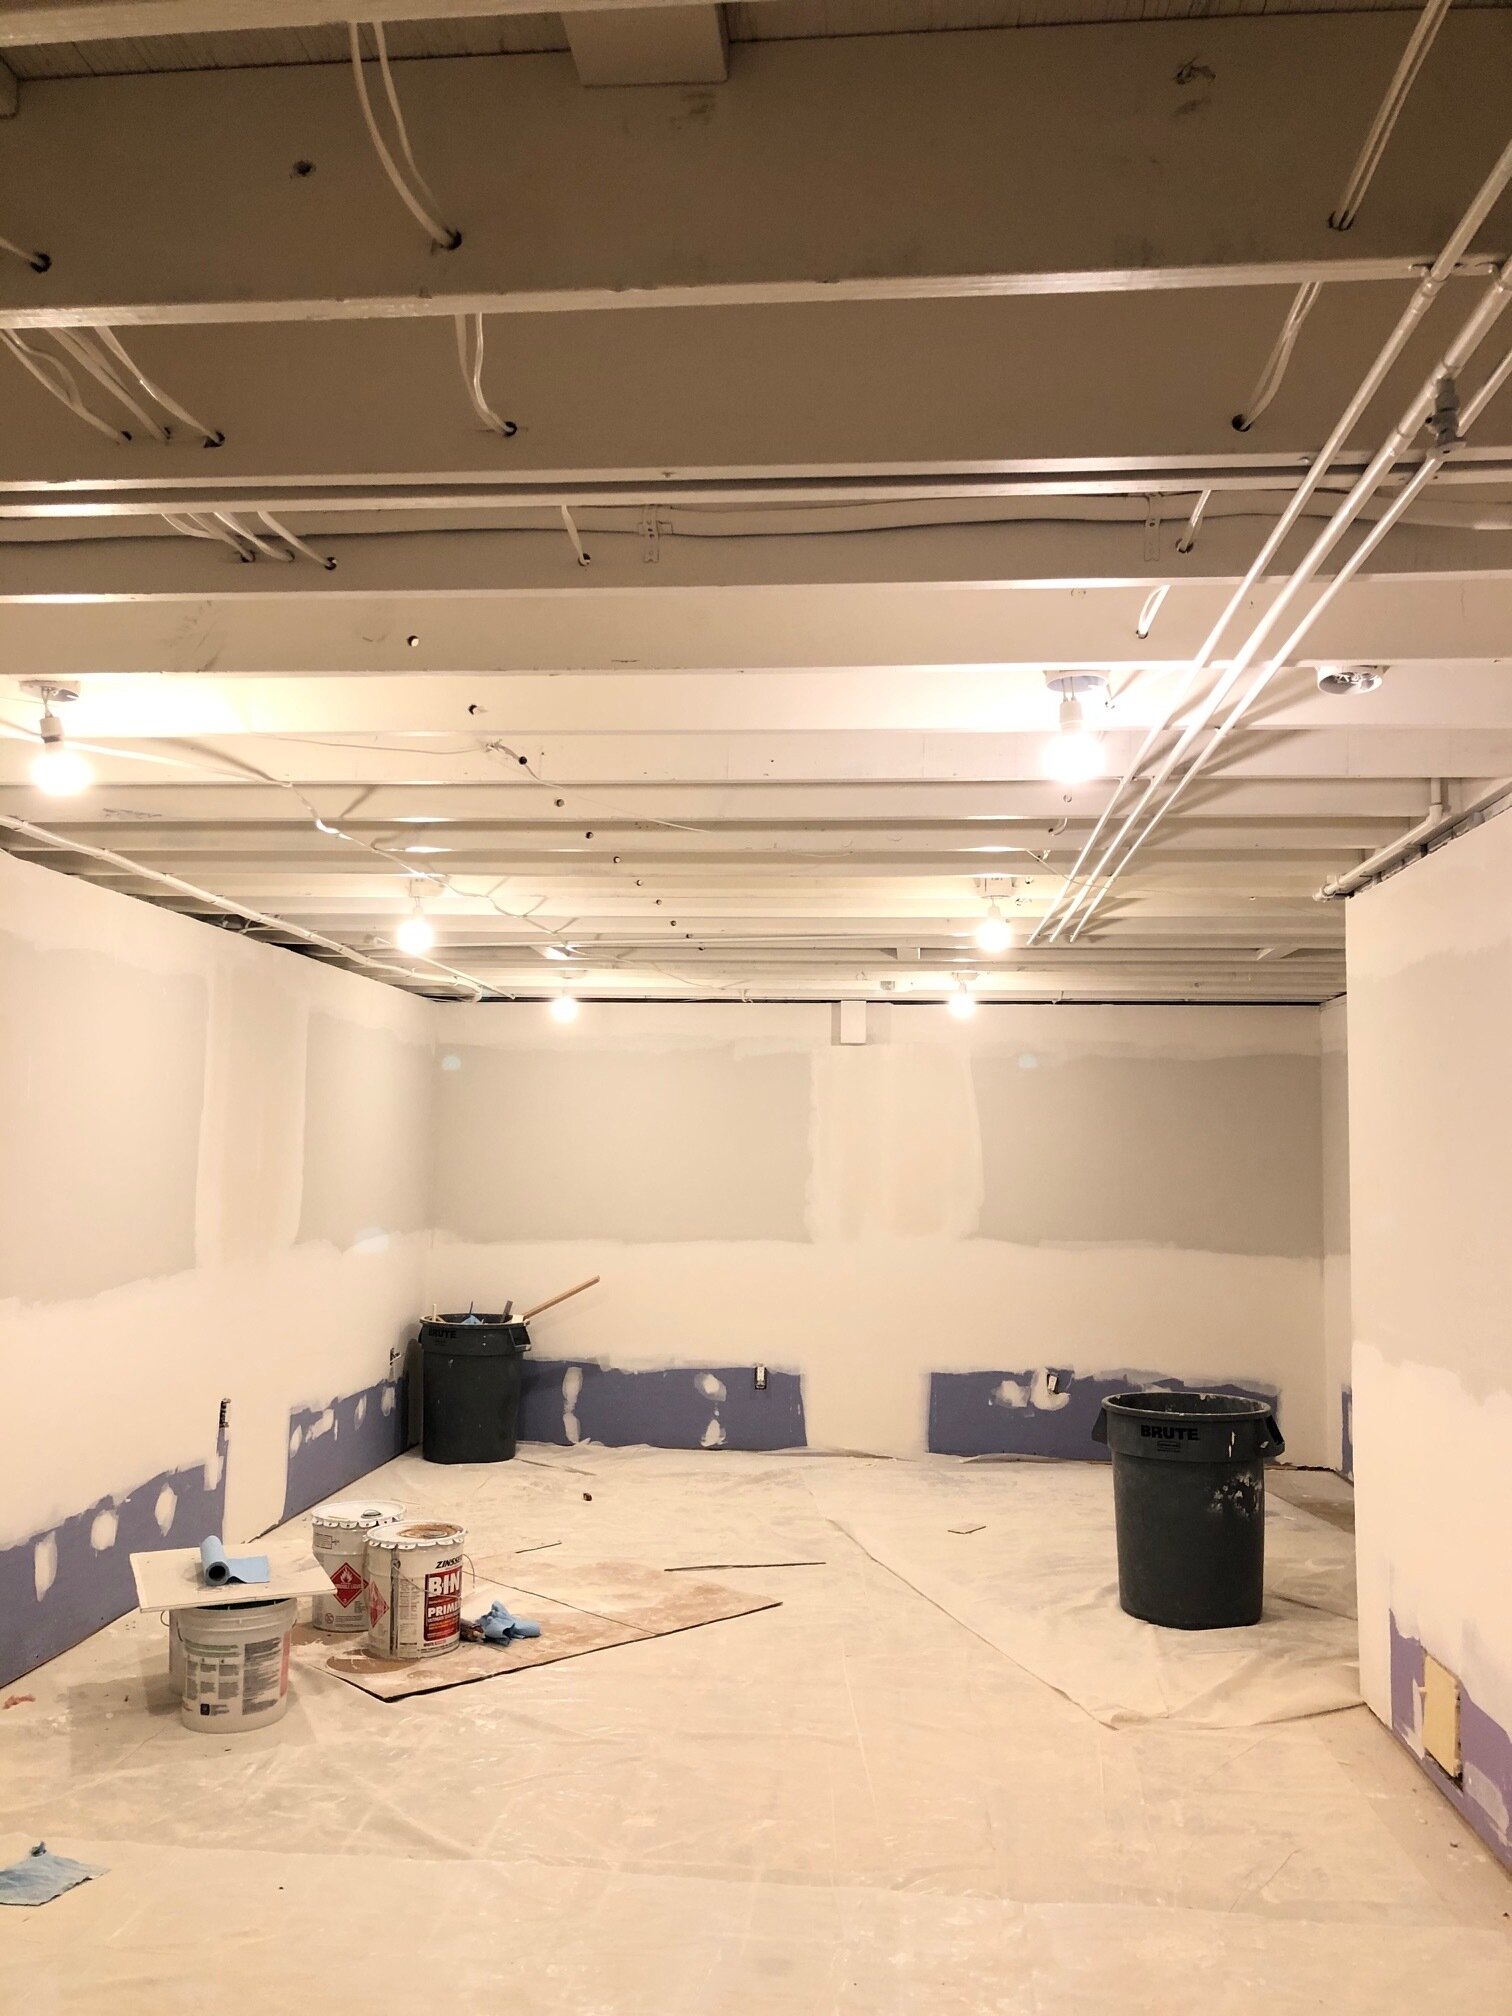 Instead of replacing the drop ceiling, we added a little height by keeping it open and spraying it all with a white shellac primer.